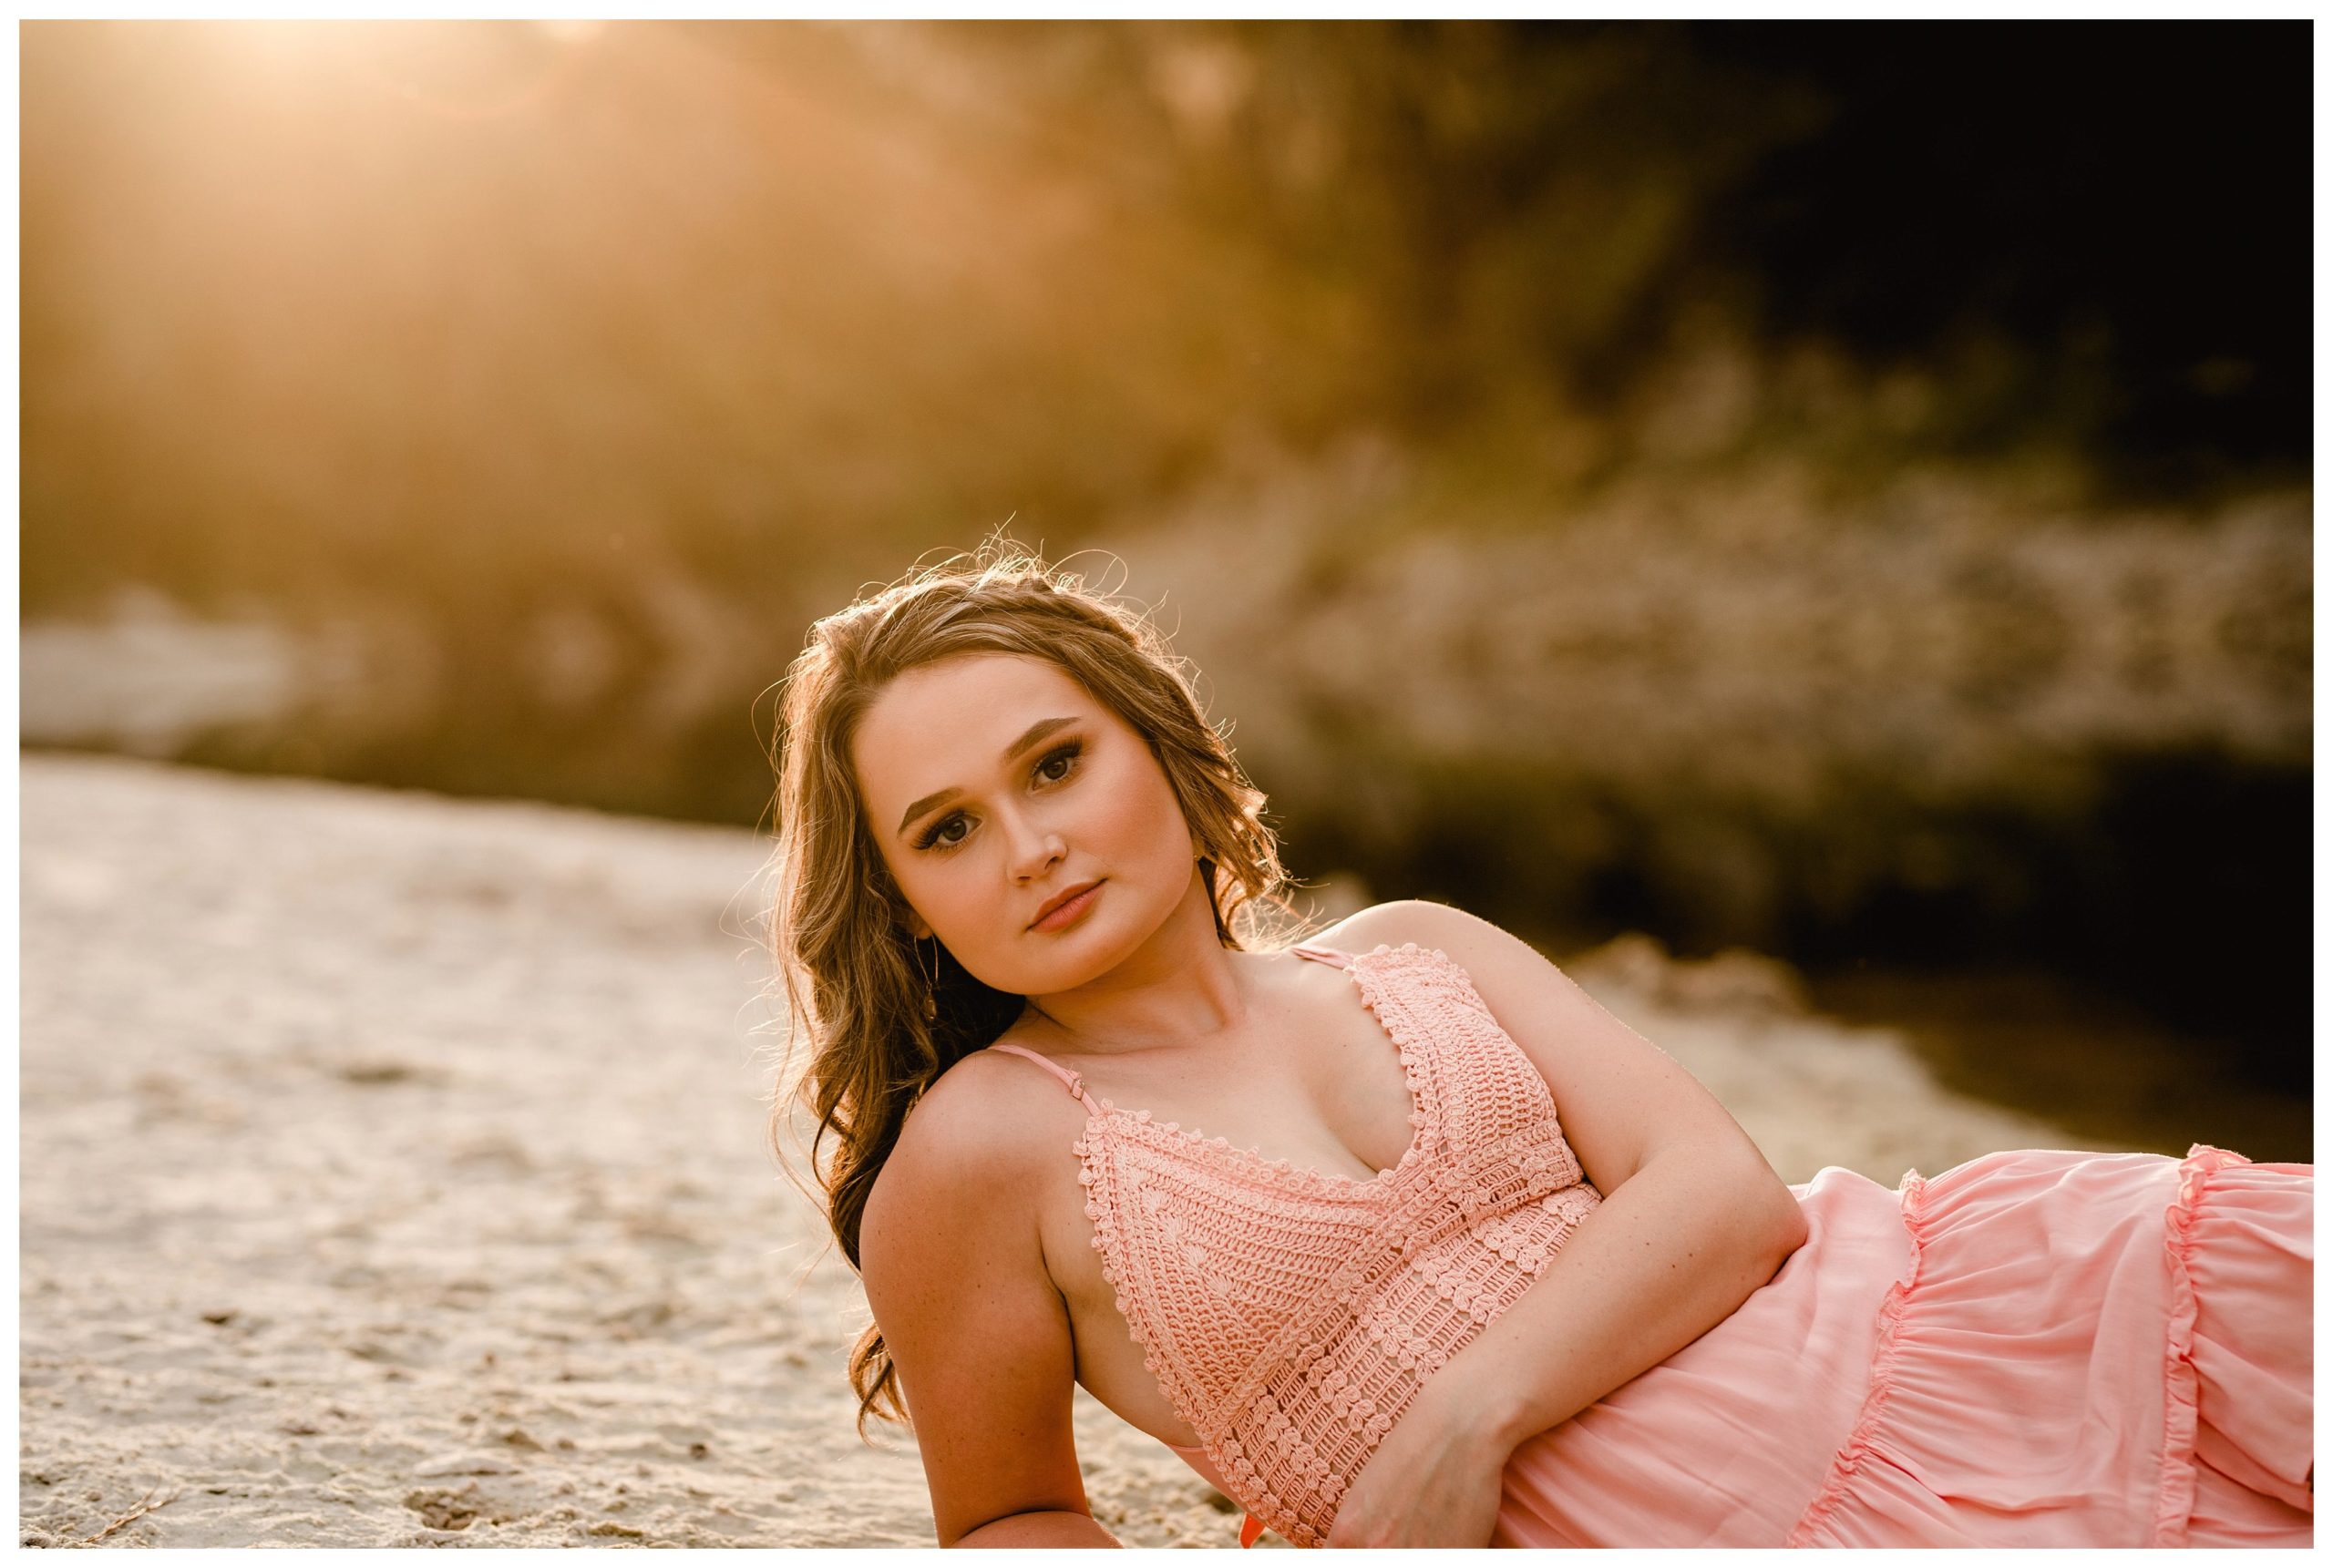 Senior pictures taken on the river with girl posed laying down.